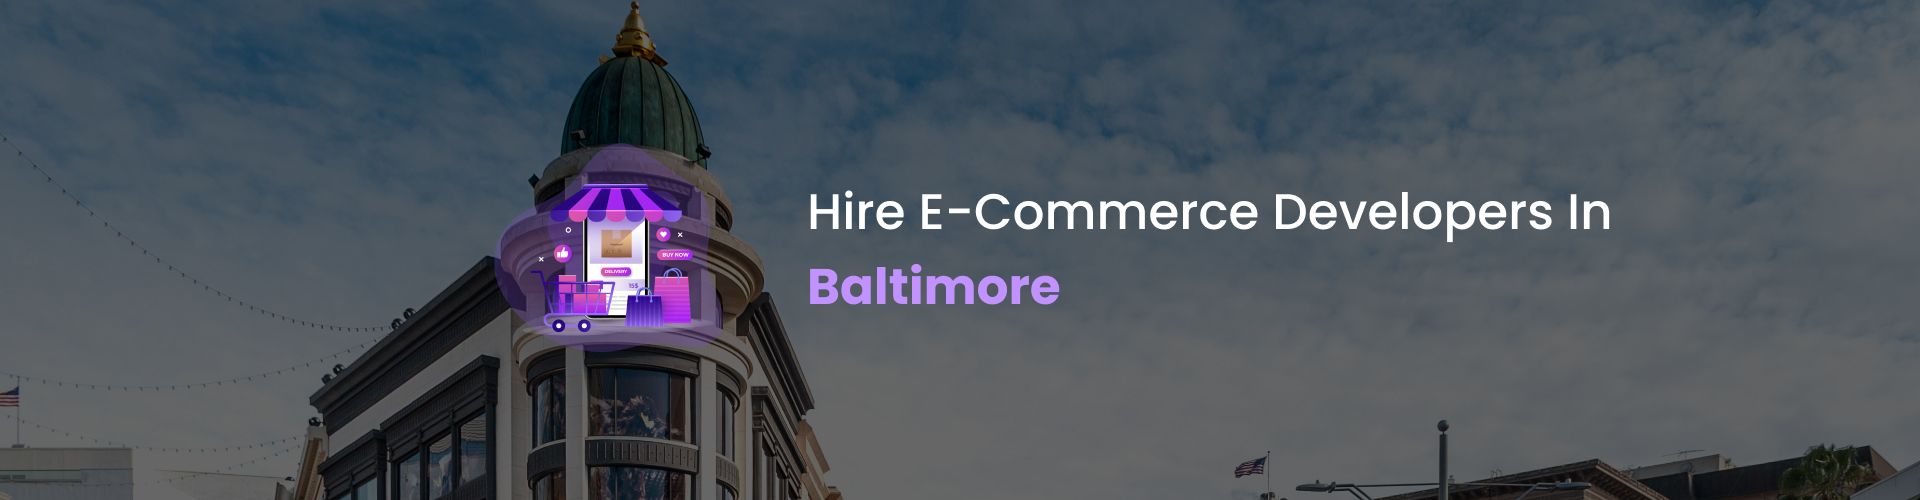 ecommerce developers in baltimore